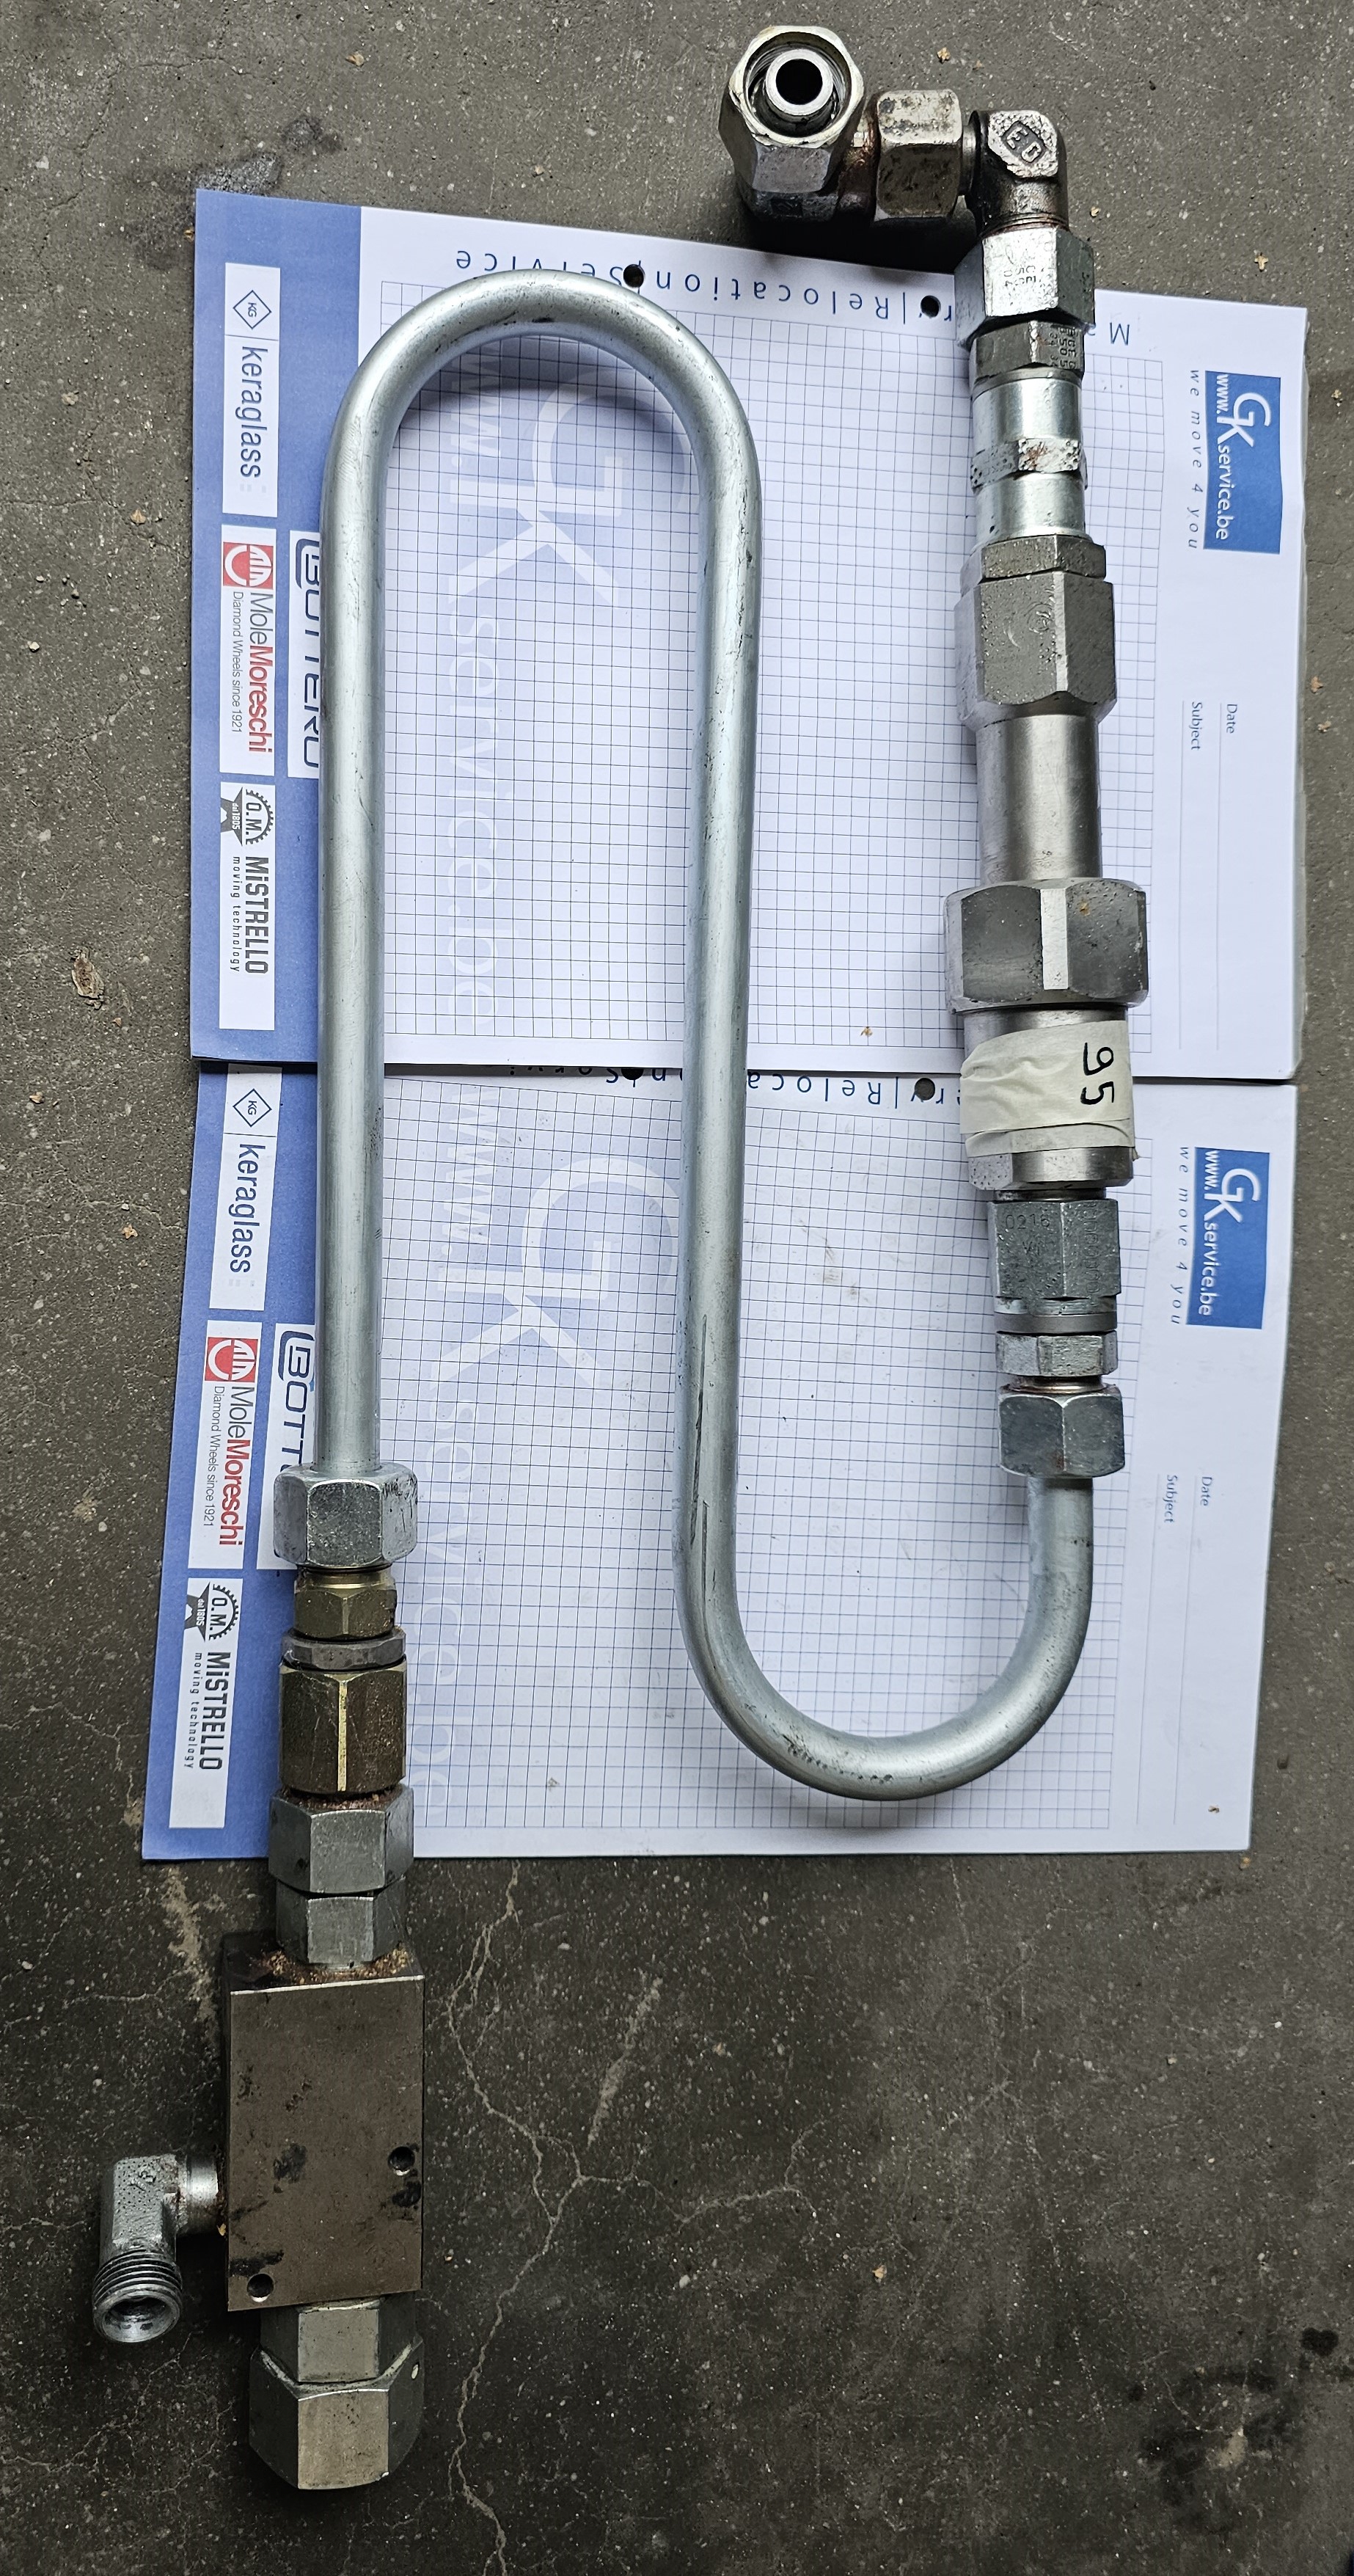 OND-119 Lisec Mixer + connection and valves